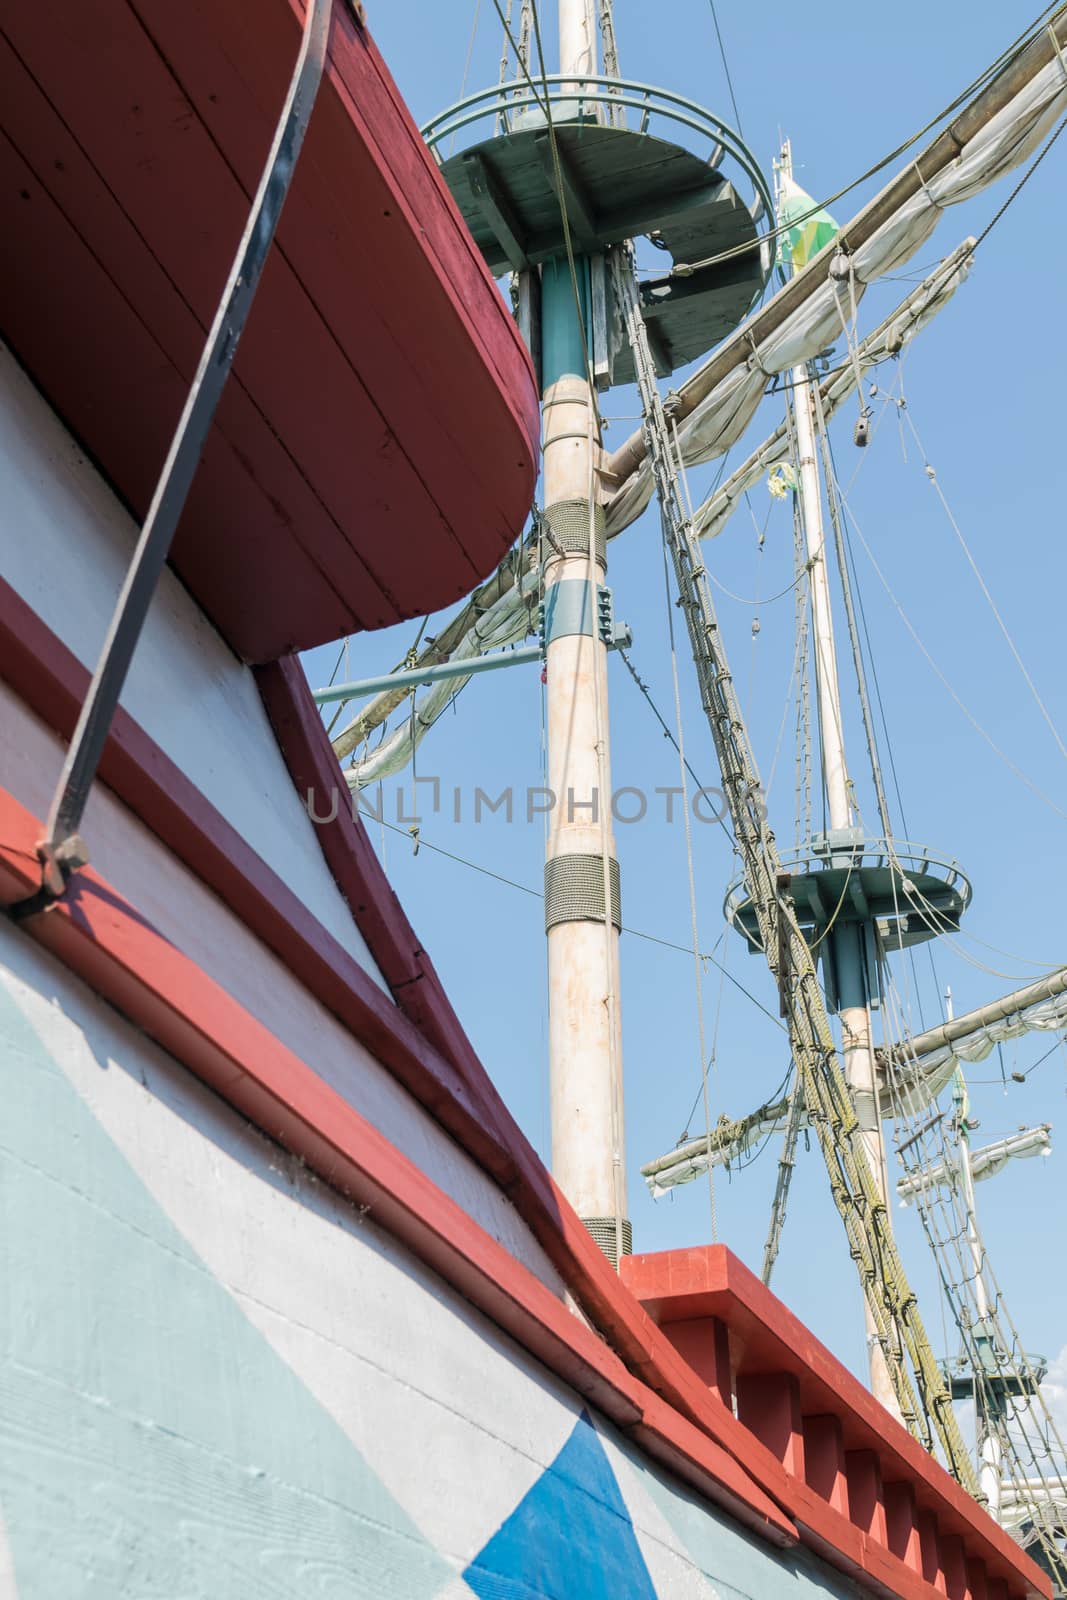 The masts of a sailboat. by Isaac74